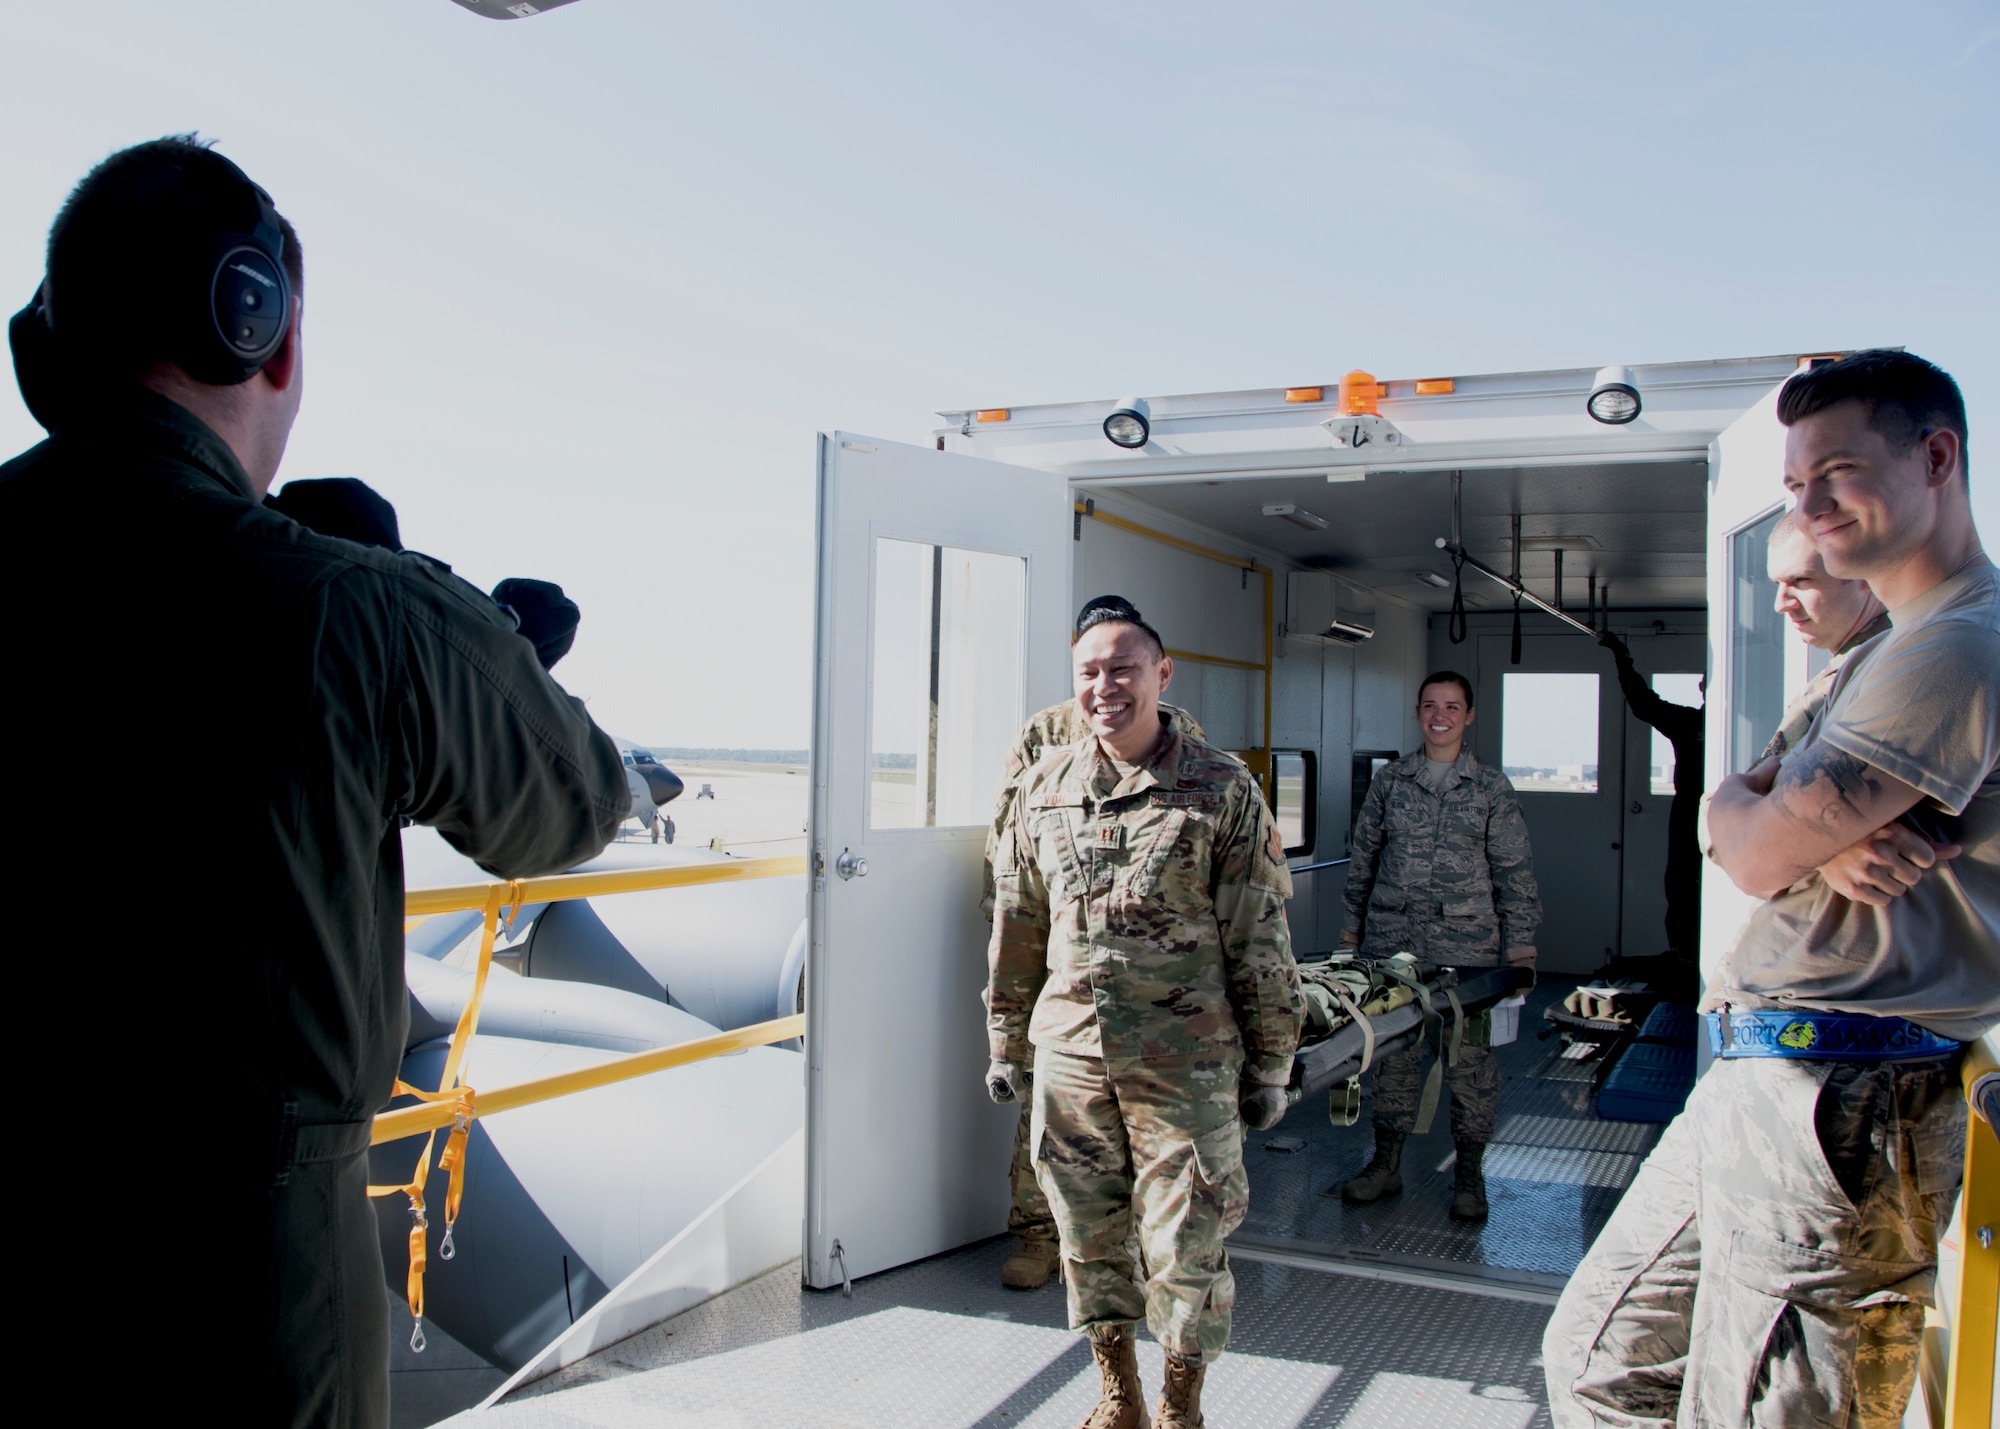 Capt. Francisco Vidal, 459th Aeromedical Evacuation Squadron medical services corps officer and Senior Airman Hilary Bliss, 459 AES squadron aviation resource manager, carry a patient onto a KC-135 Stratotanker in preparation for an off station trainer Sept. 20, 2019, at Joint Base Andrews, Md. The team participates in local and off station training missions about twice a month to ensure humanitarian and deployment mission readiness. (U.S. Air Force photo by Staff Sgt. Cierra Presentado/Released)